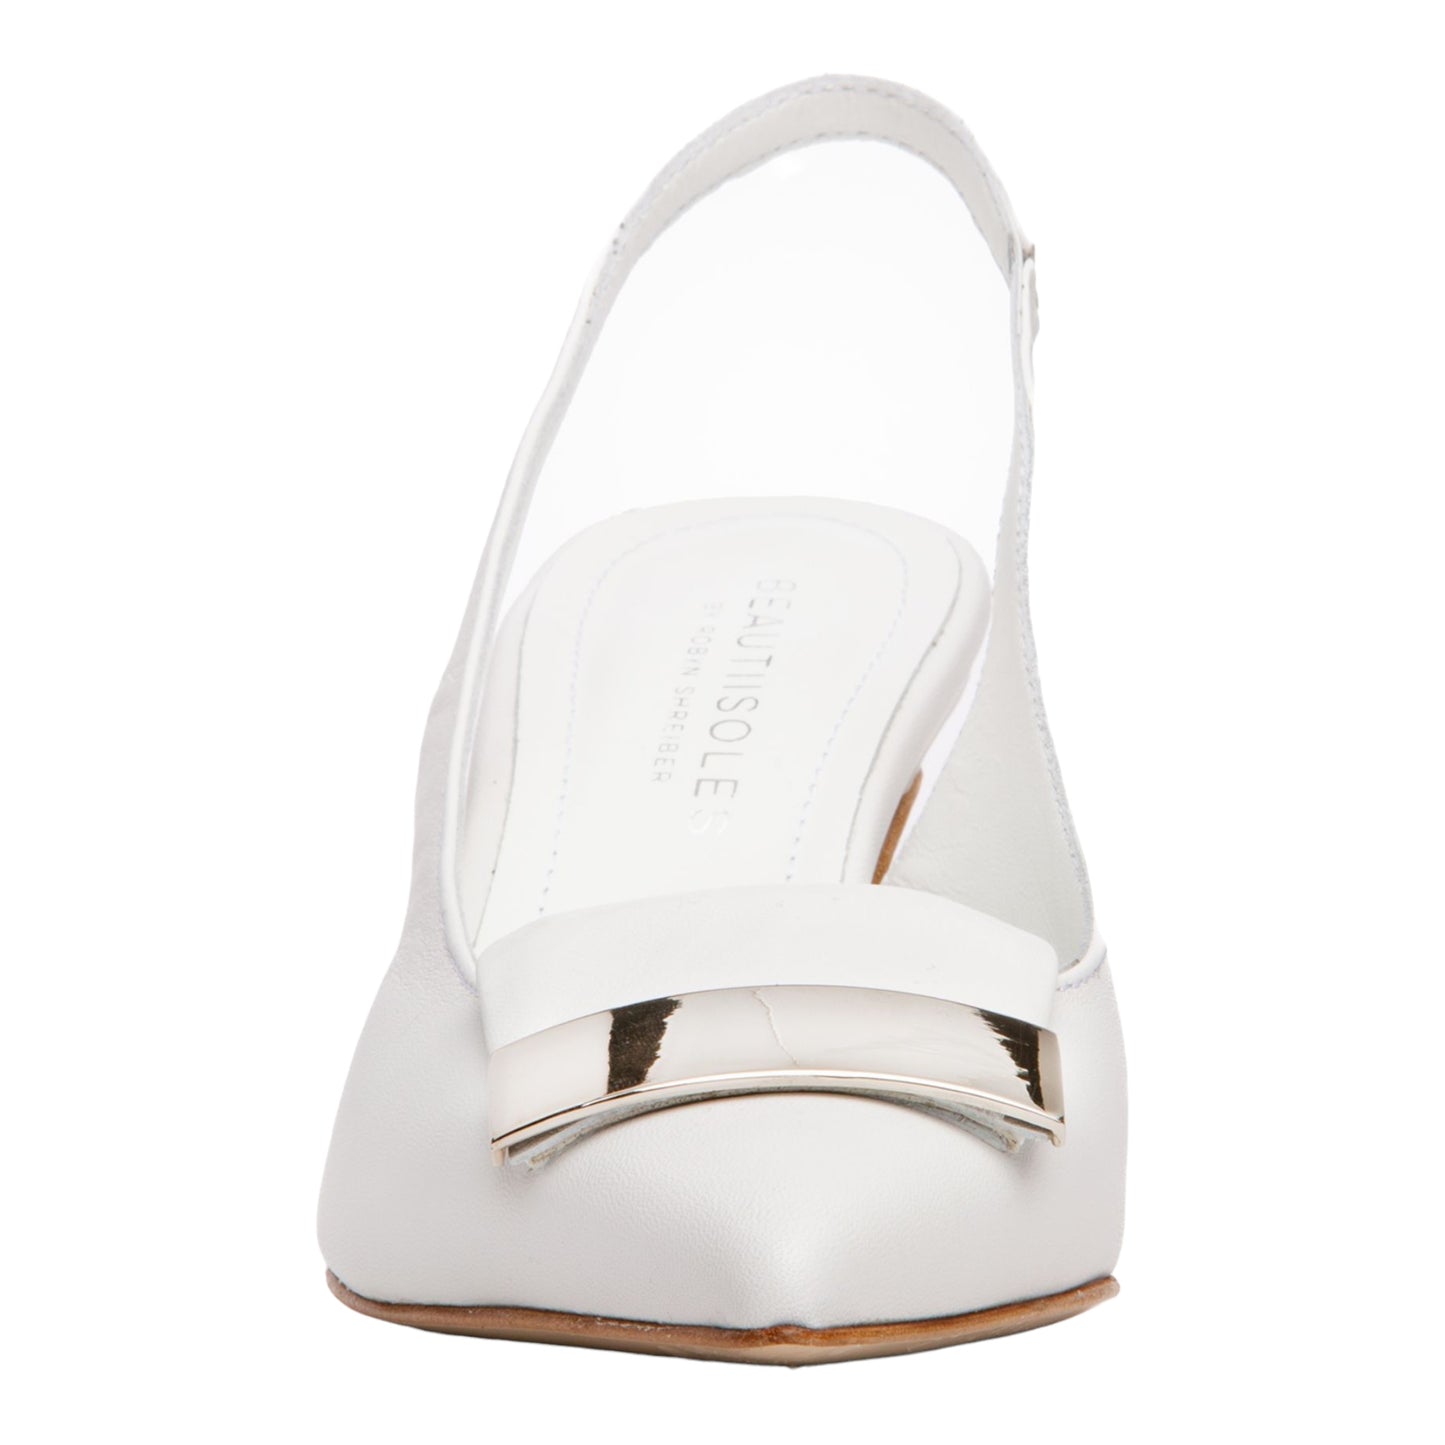 BEAUTIISOLES By Robyn Shreiber | FINA | WHITE LEATHER